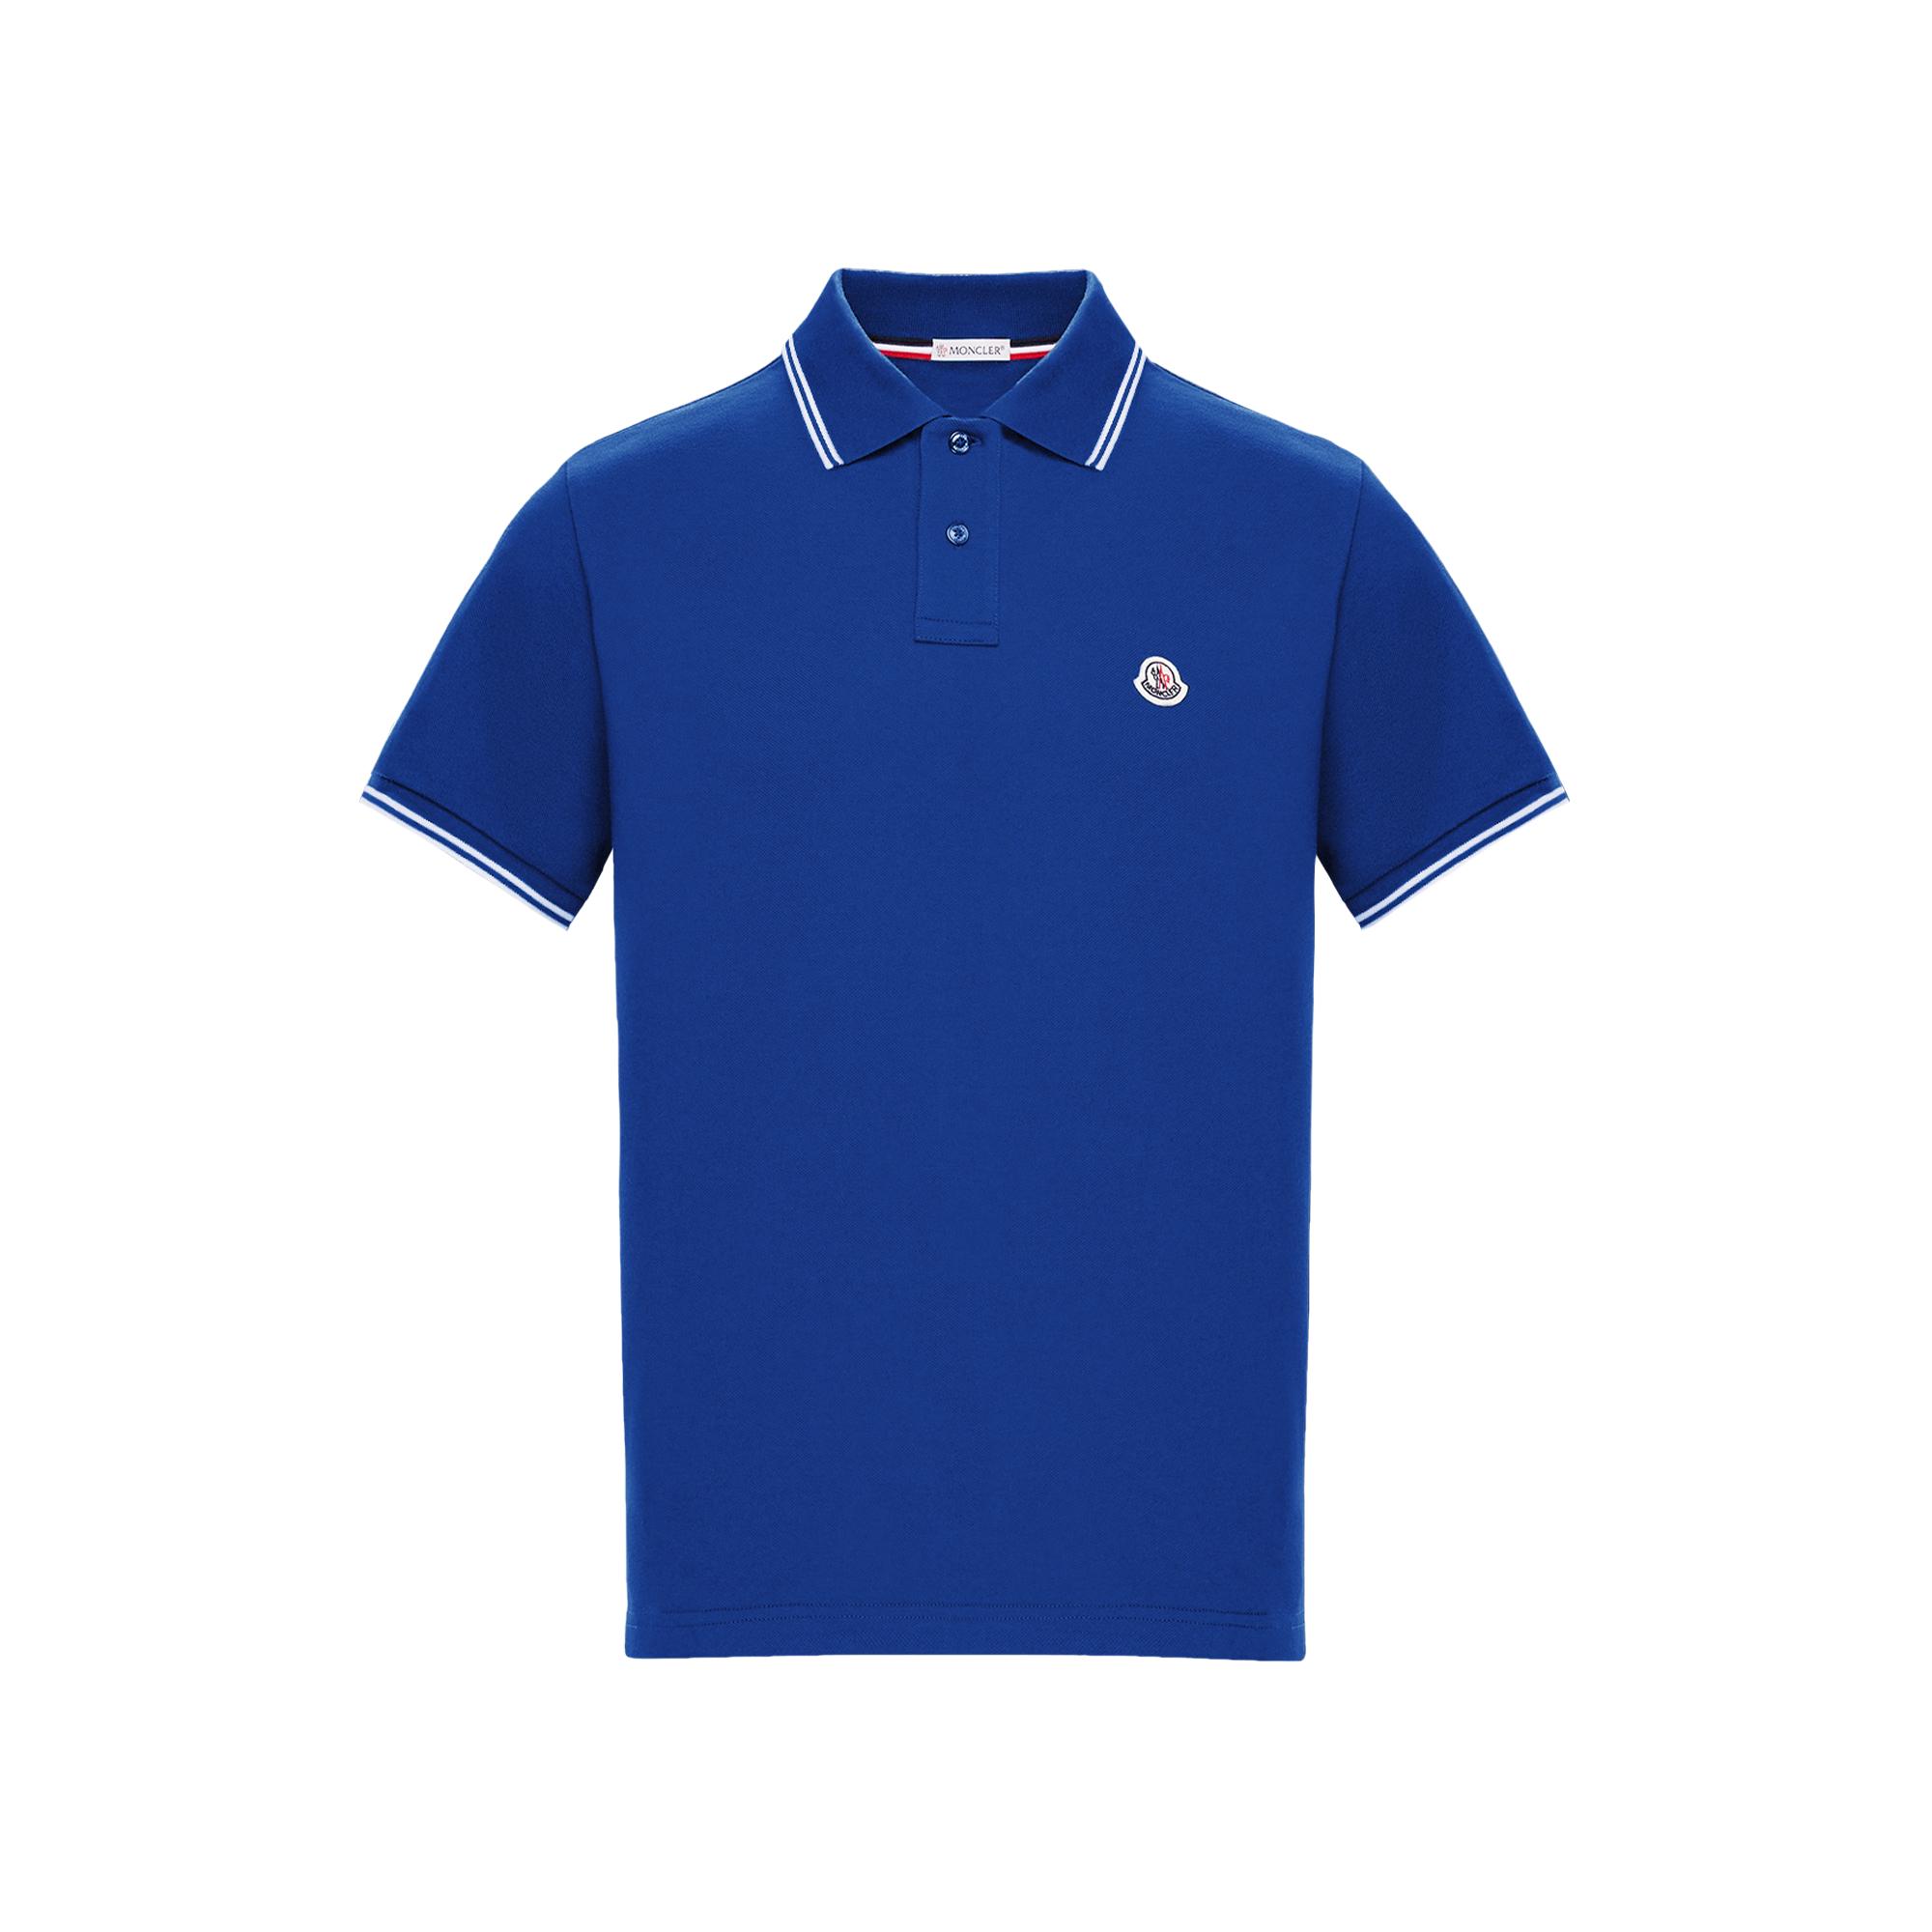 Moncler Cotton Polo in Blue for Men - Lyst